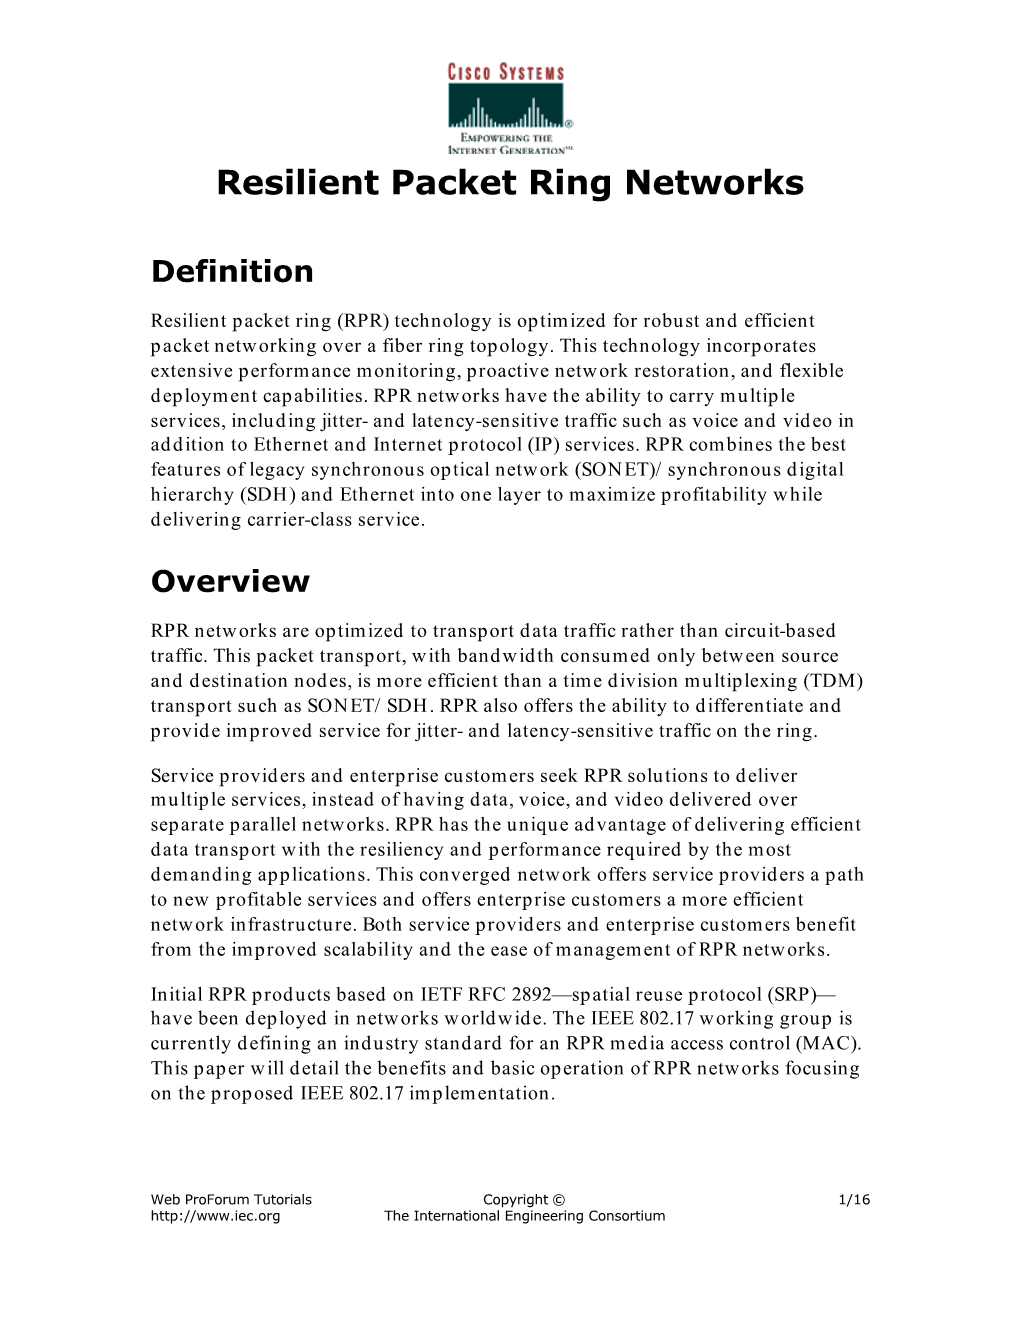 Resilient Packet Ring Networks